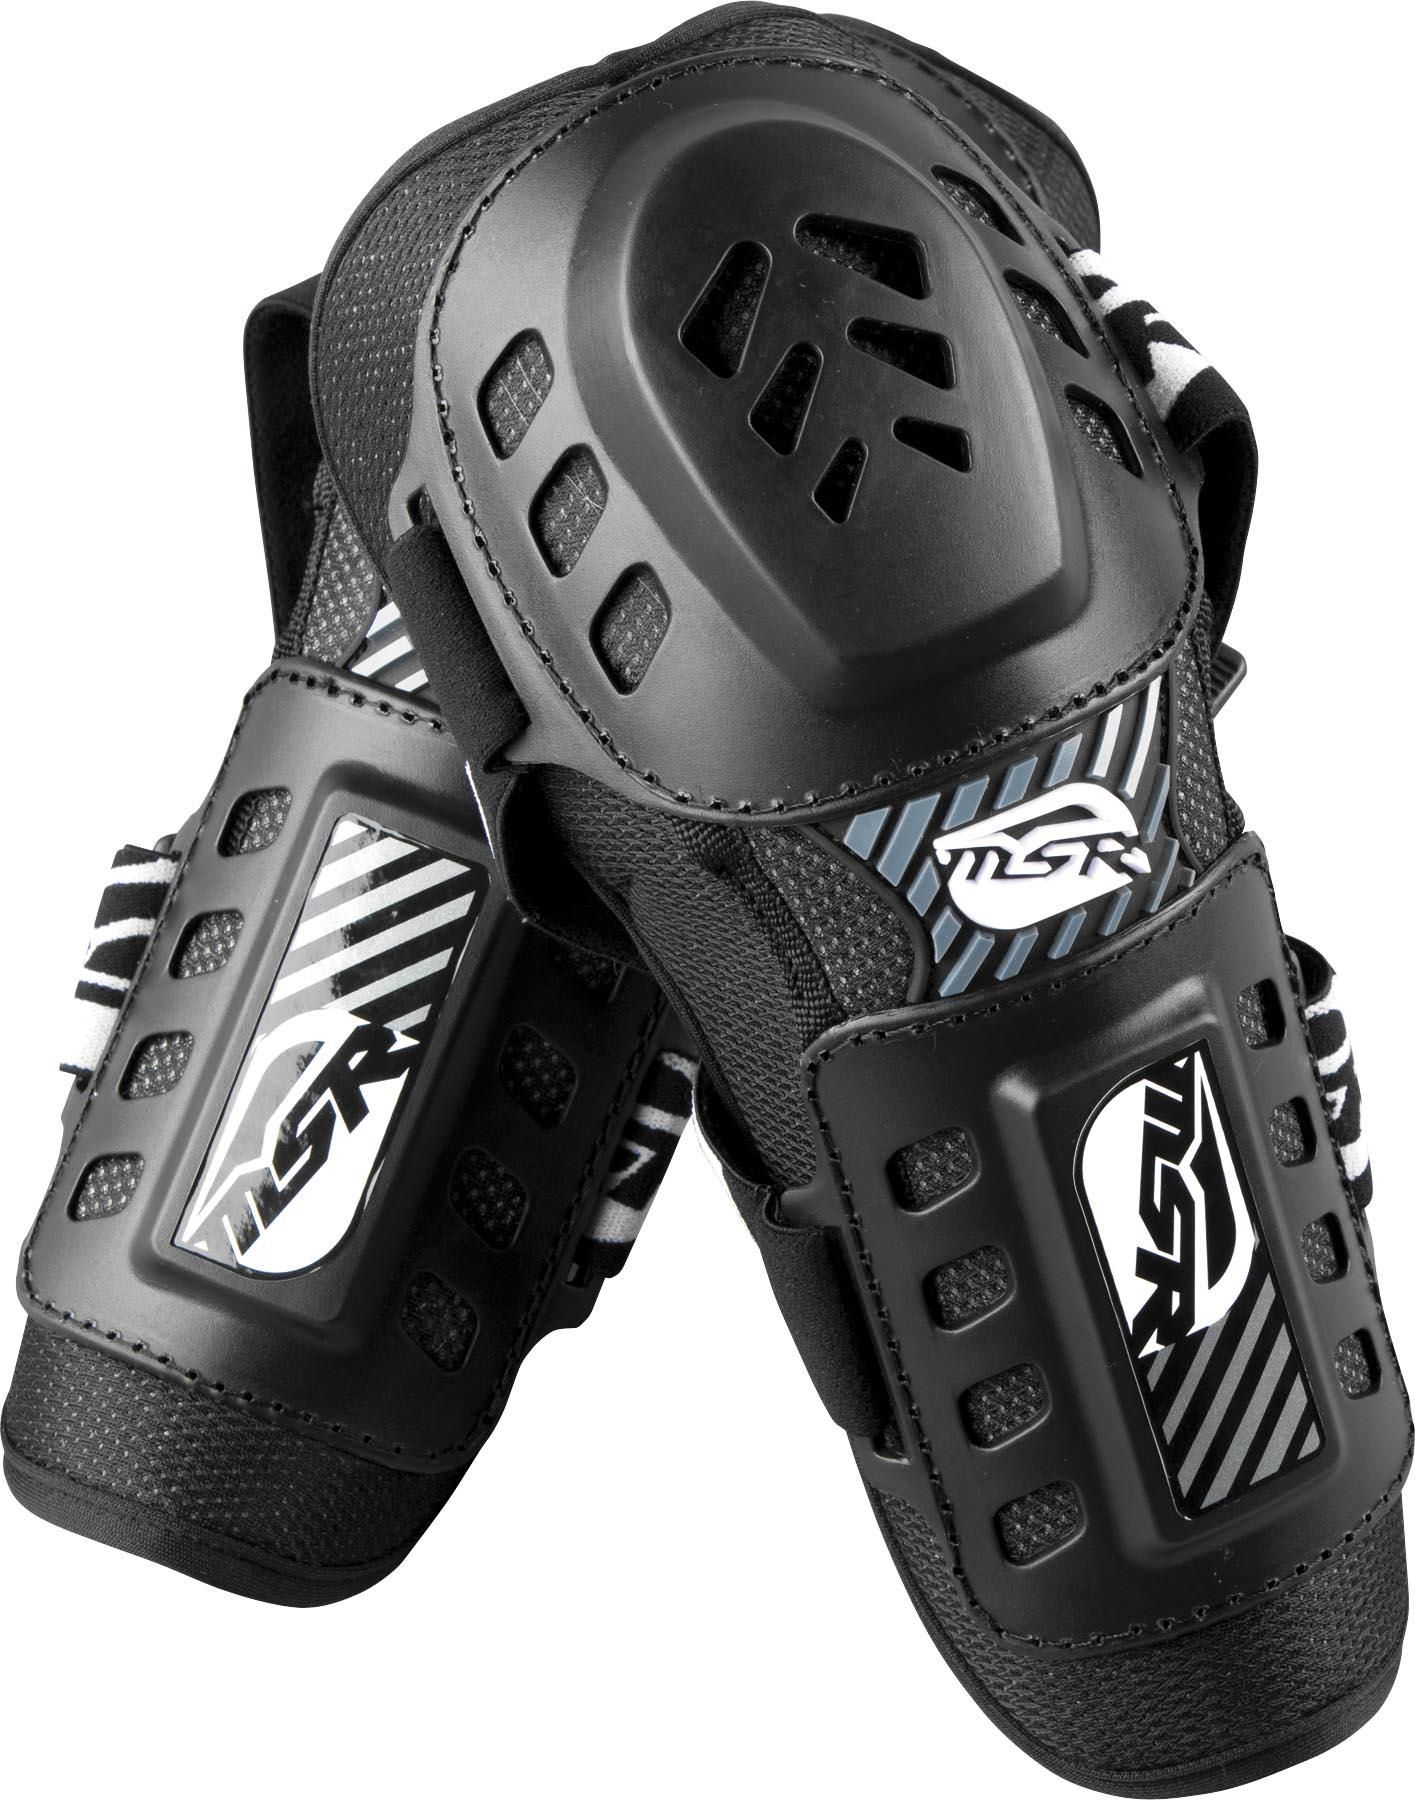 44TN-MSR-330157 Youth Gravity Elbow Guards